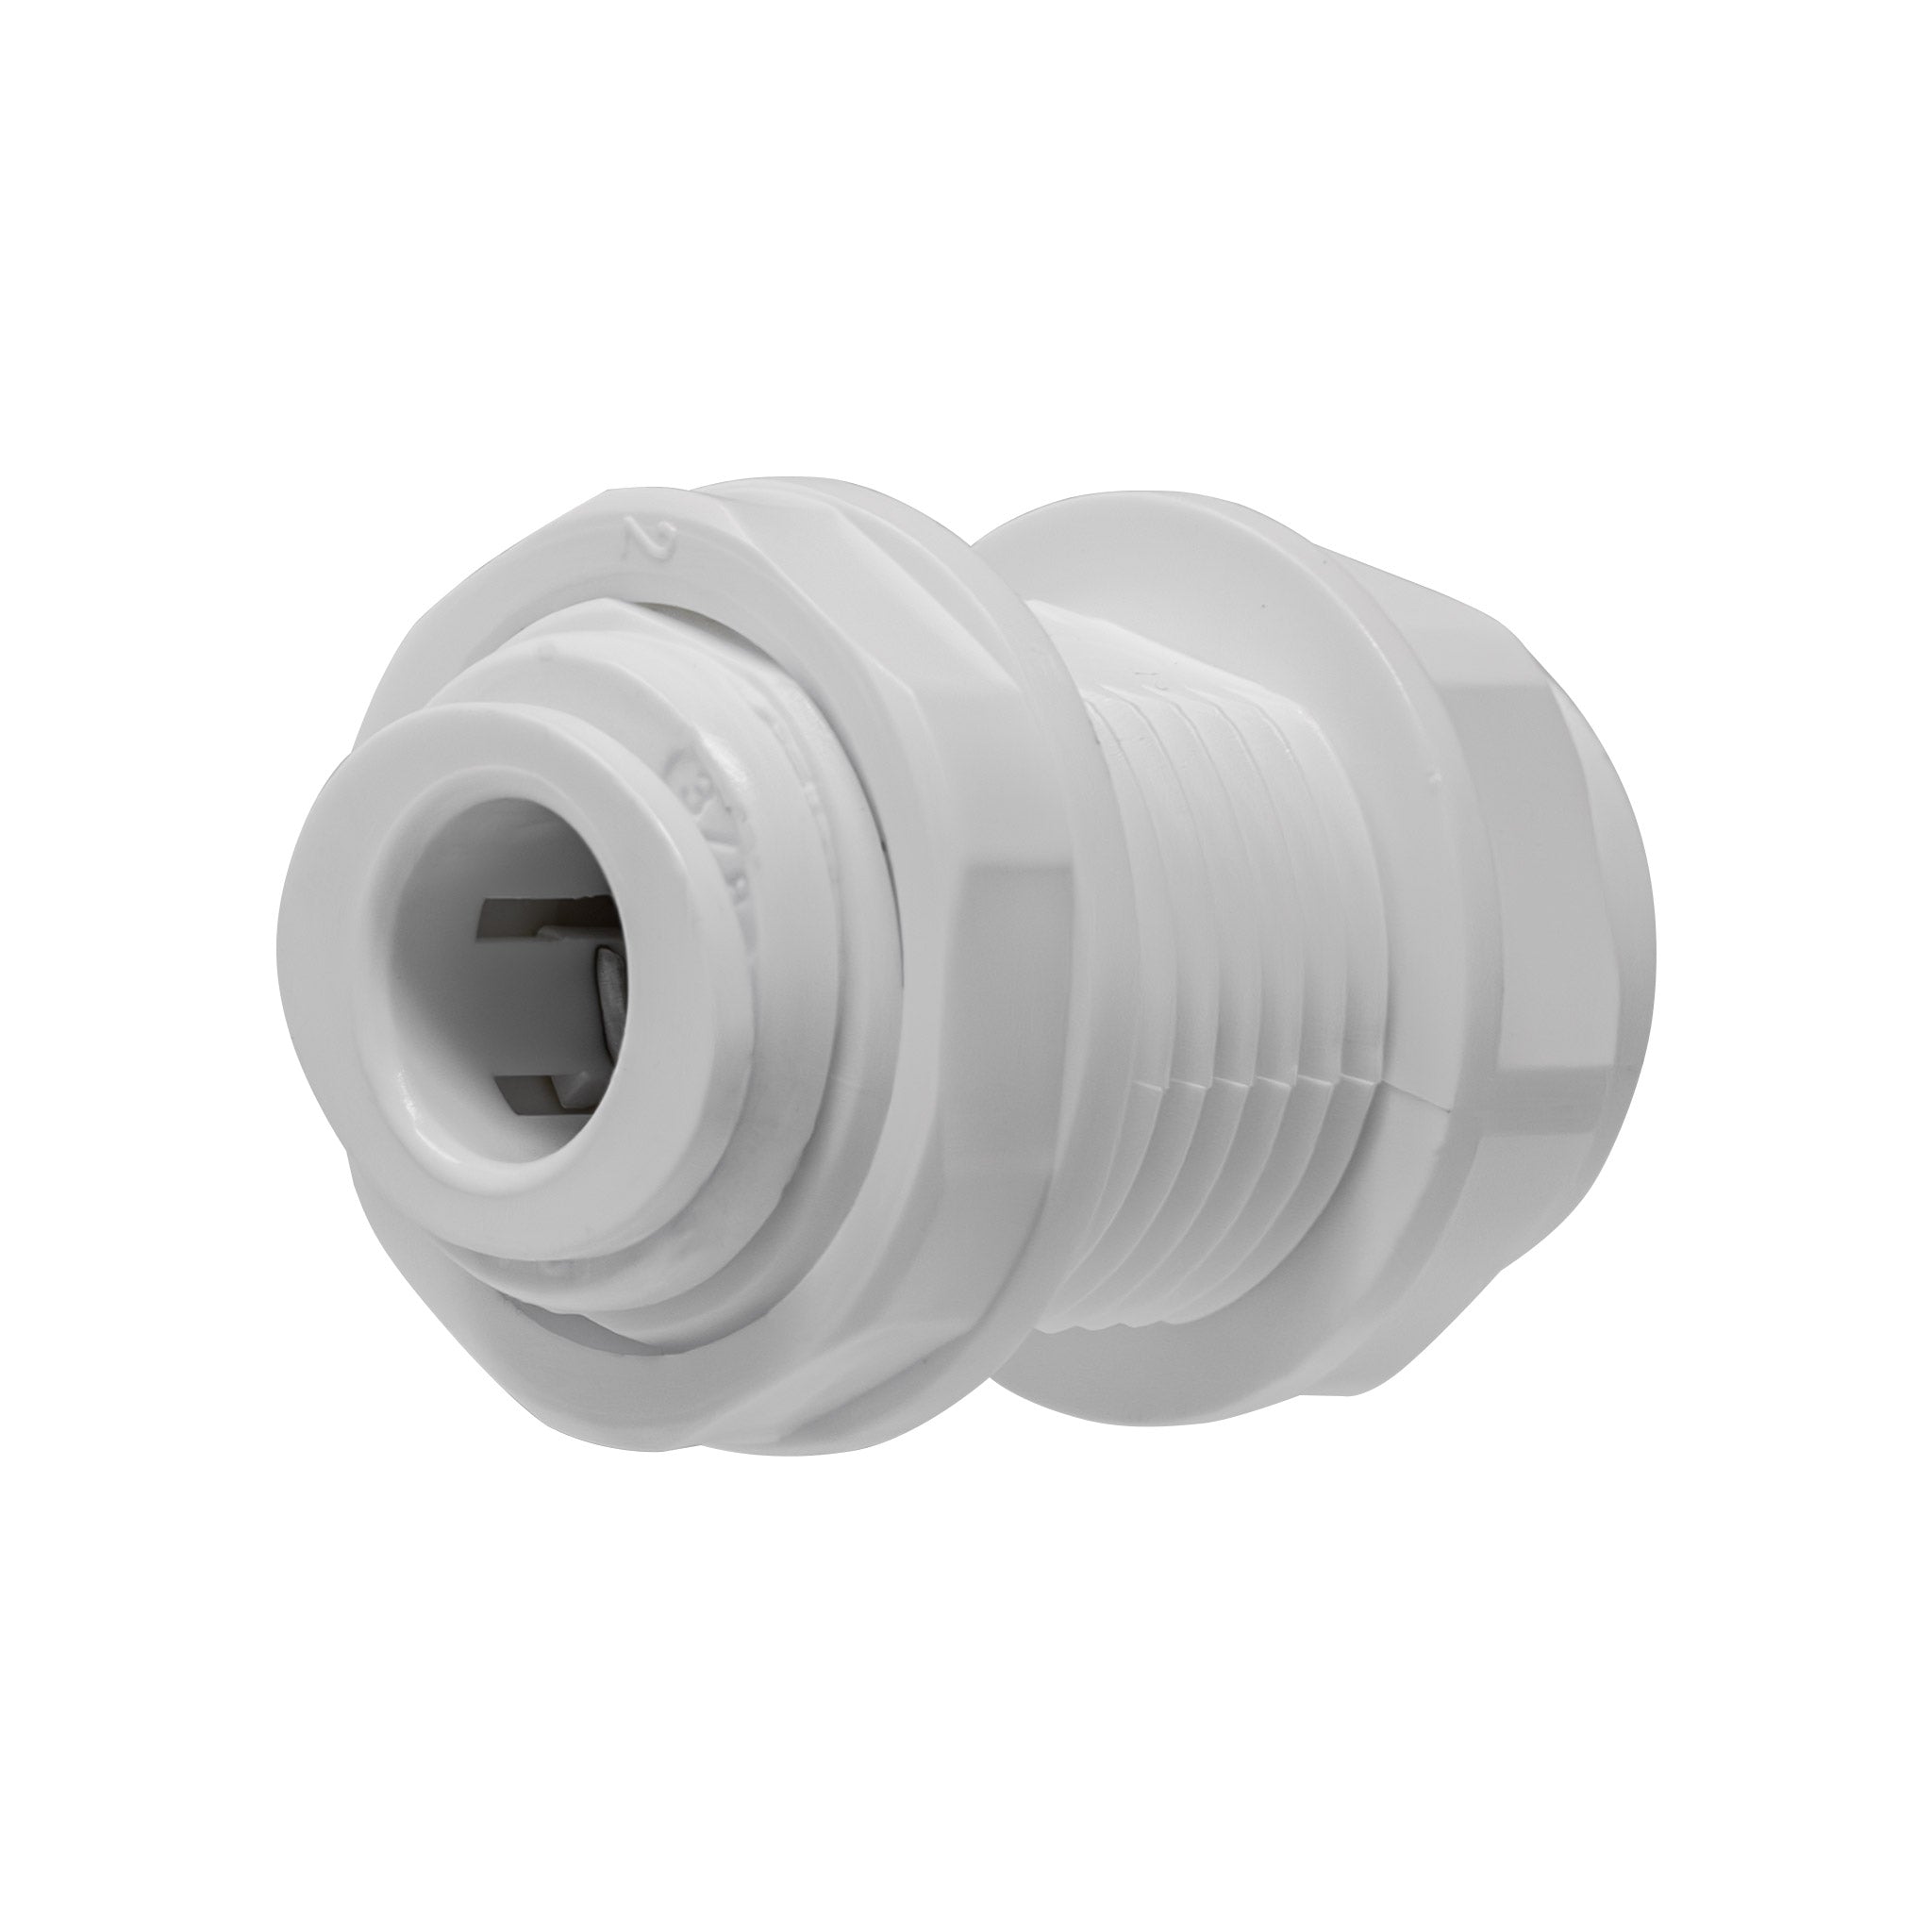 Quick connect bulkhead union. 1/4" quick connect x 3/8" quick connect (nut end). Certified by NSF.